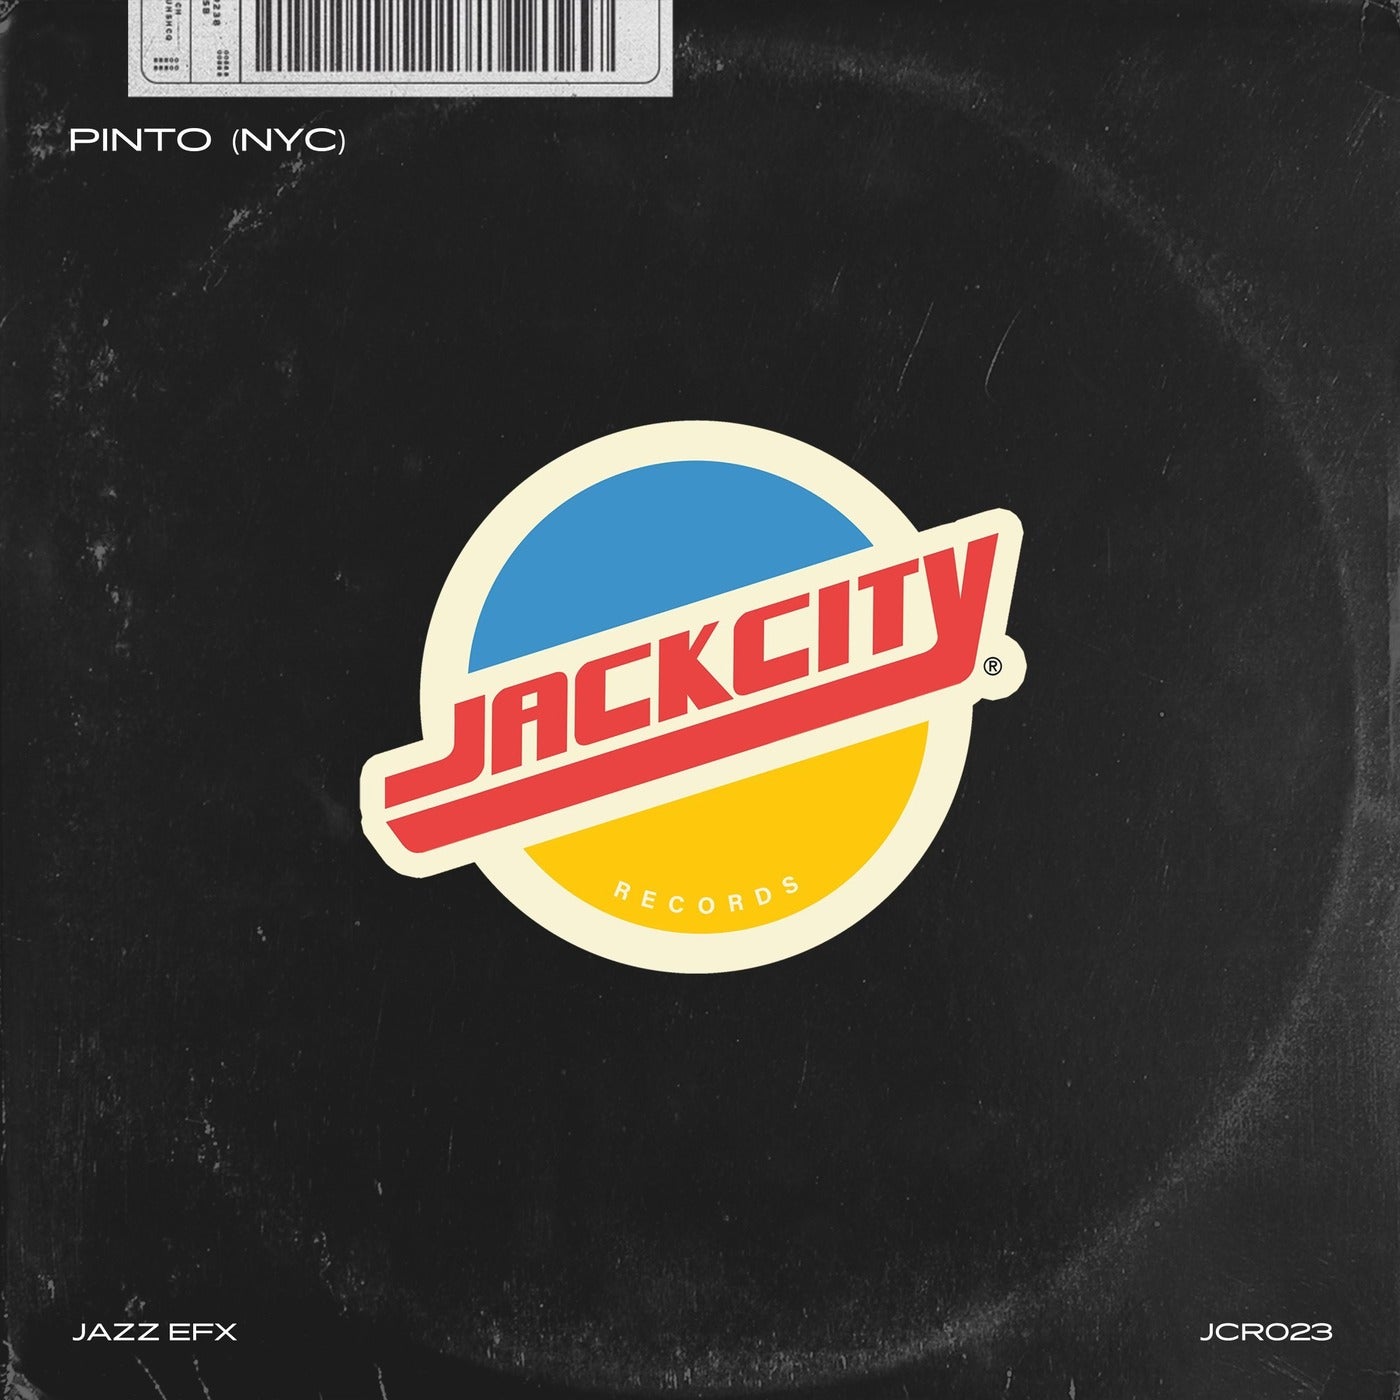 image cover: Pinto (NYC) - Jazz EFX on Jack City Records